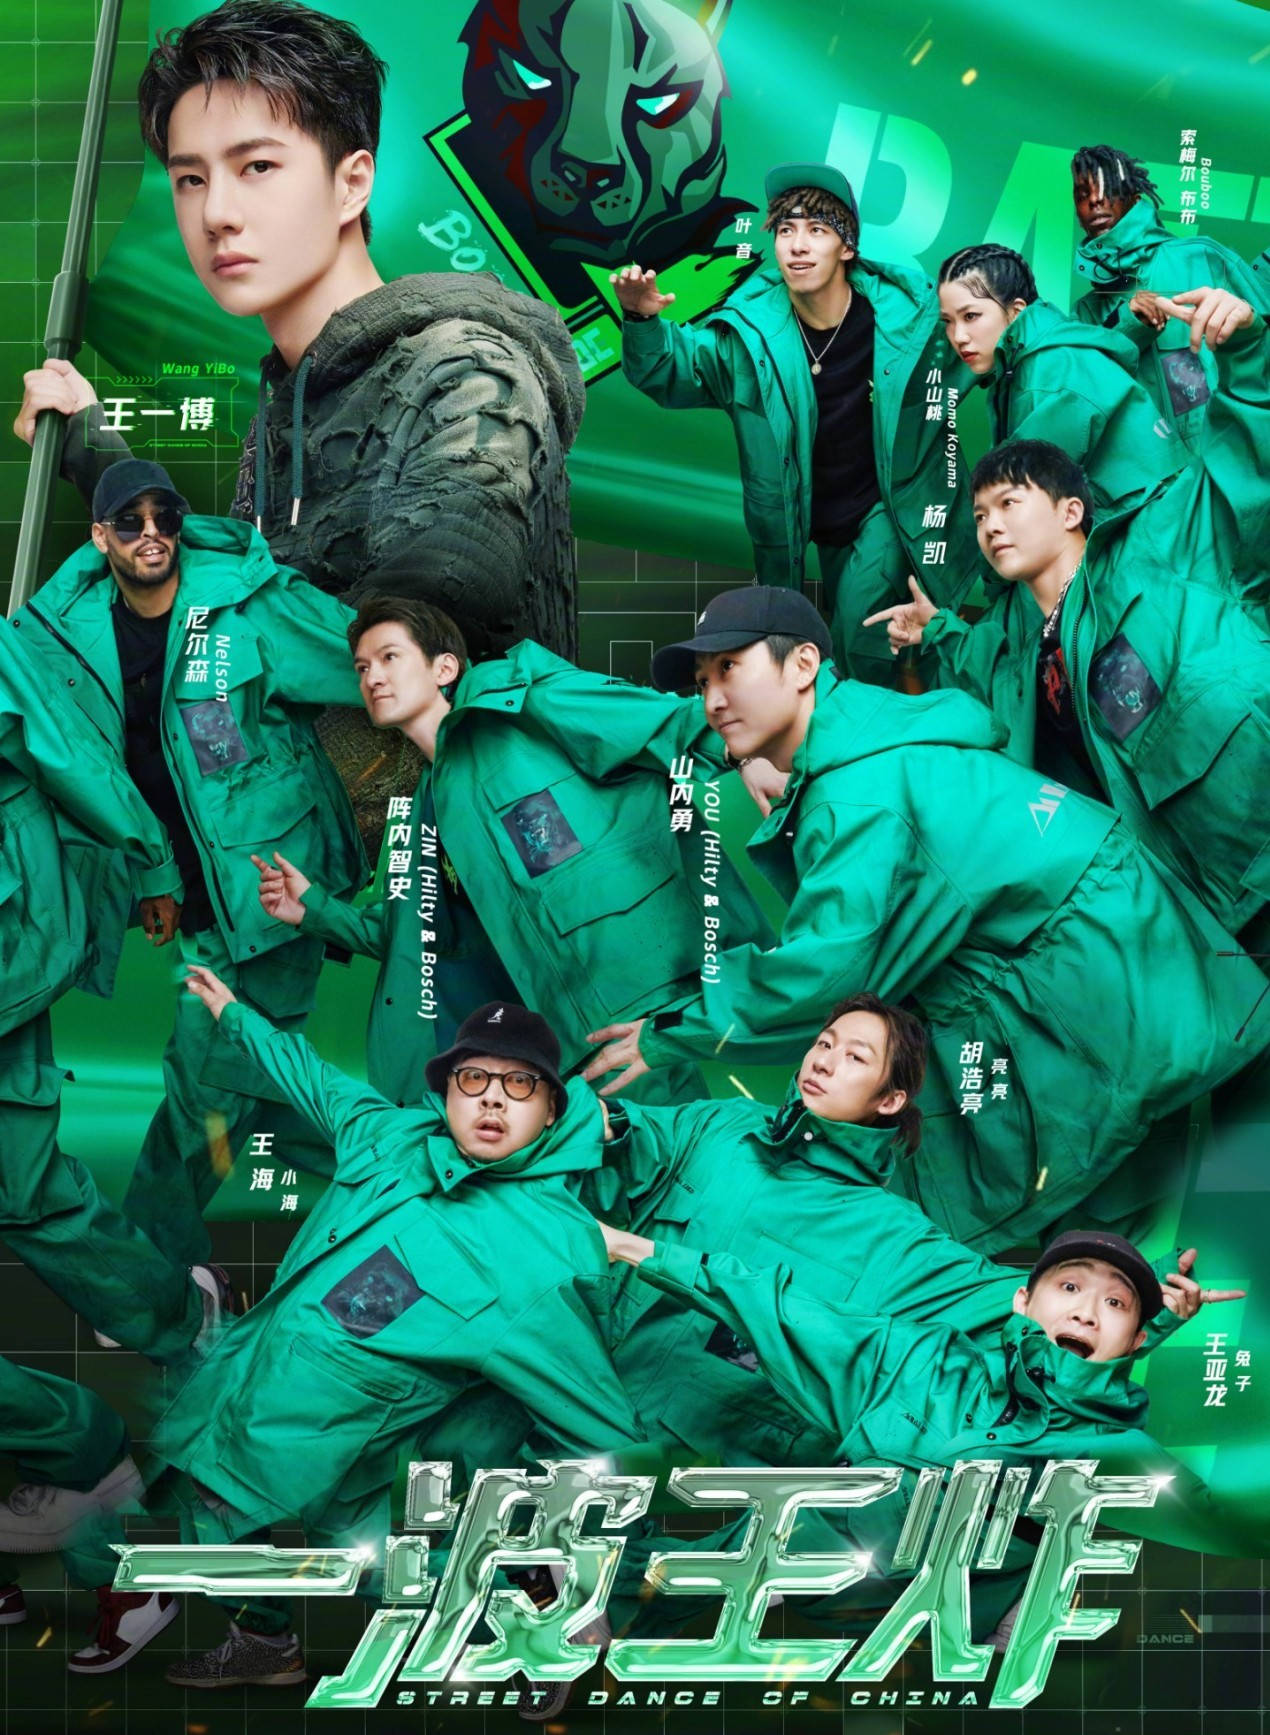 Wang Yibo In A Promotional Poster For Street Dance Of China.